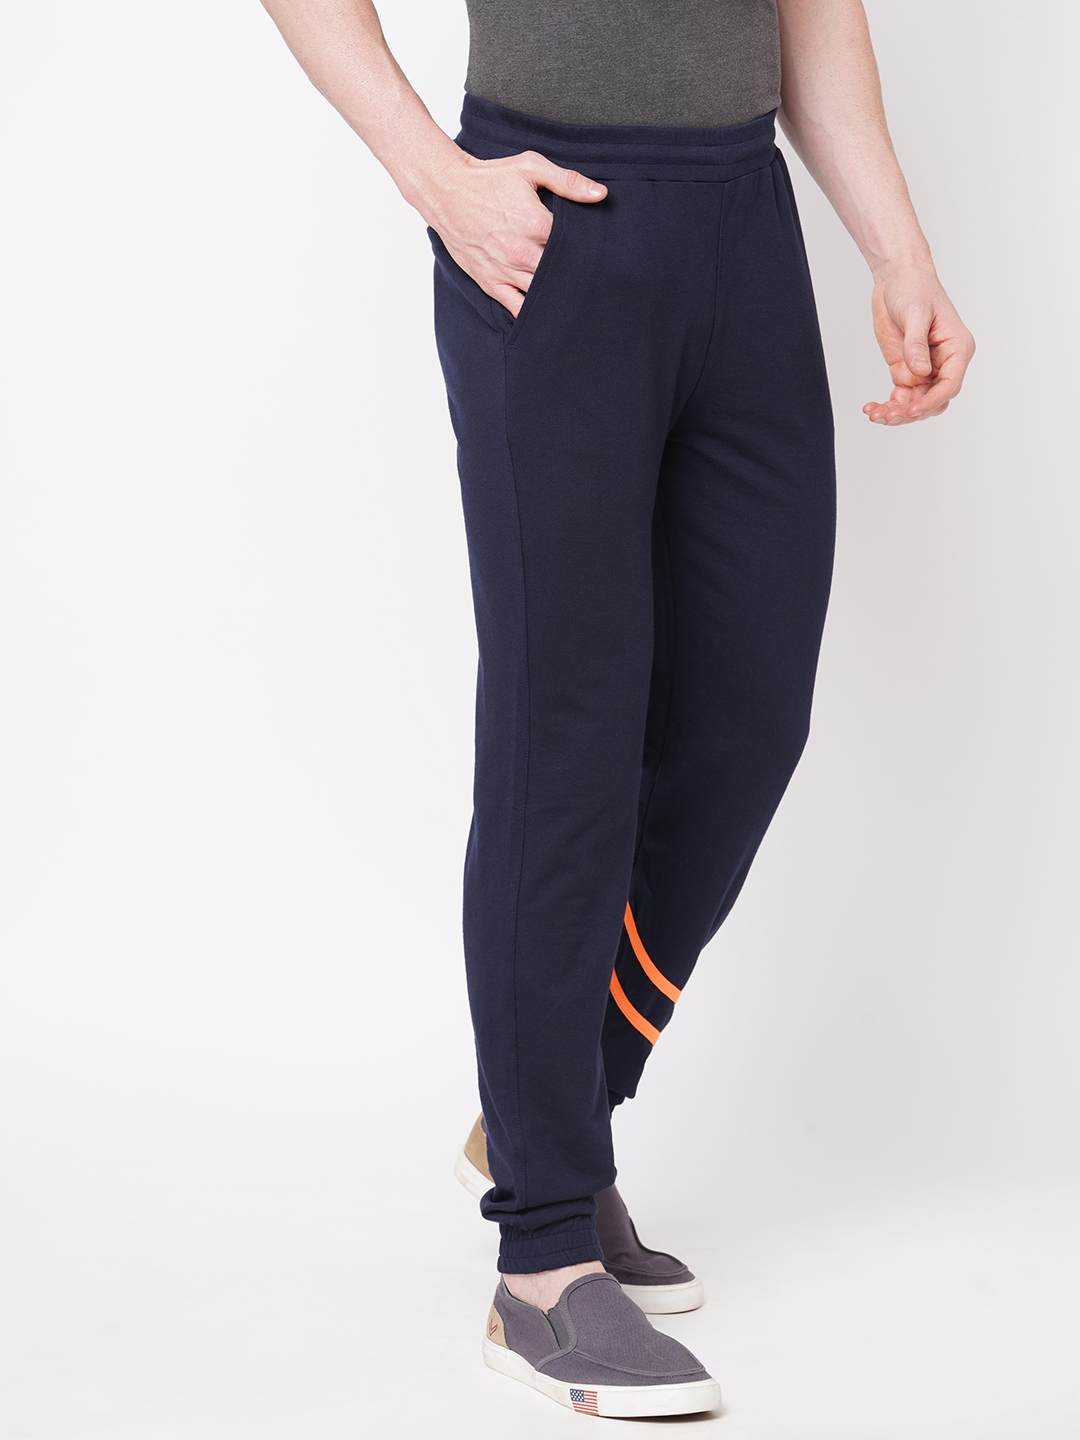 Fitz Dark Navy Solid Slim Fit Joggers with cross Pockets